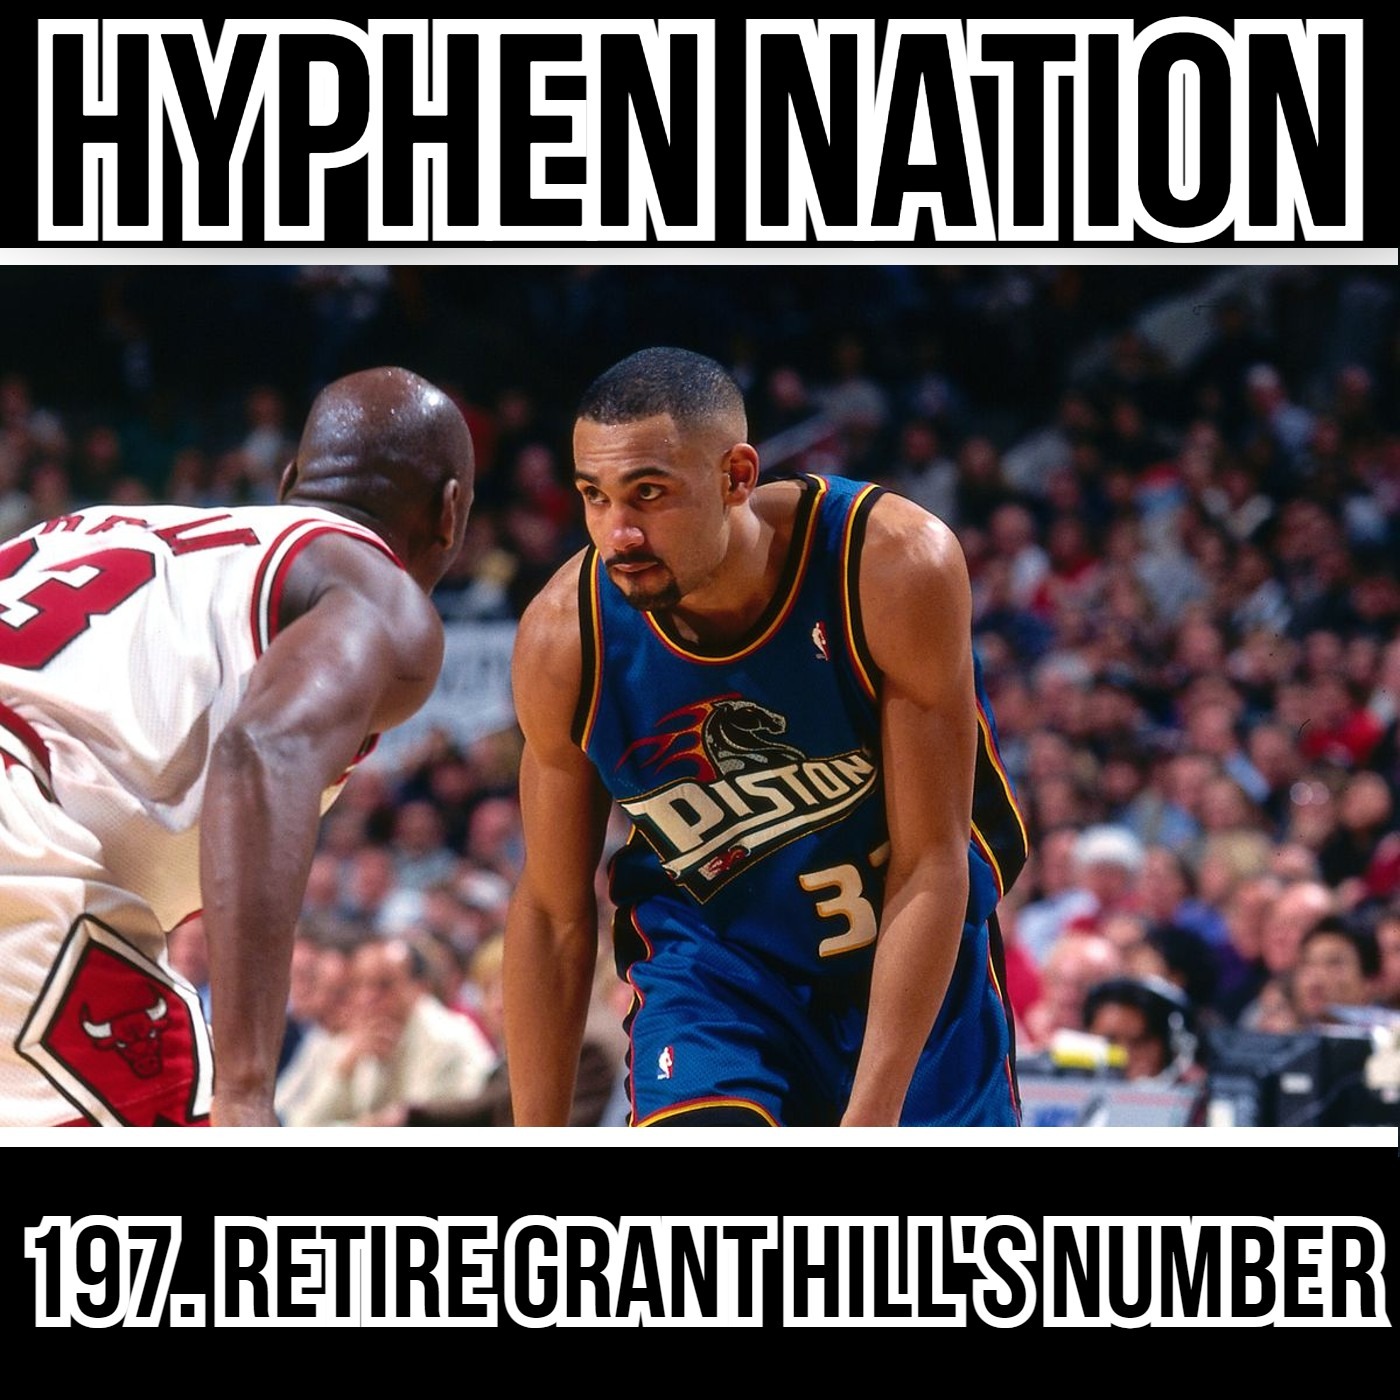 197. Retire Grant Hill's Number